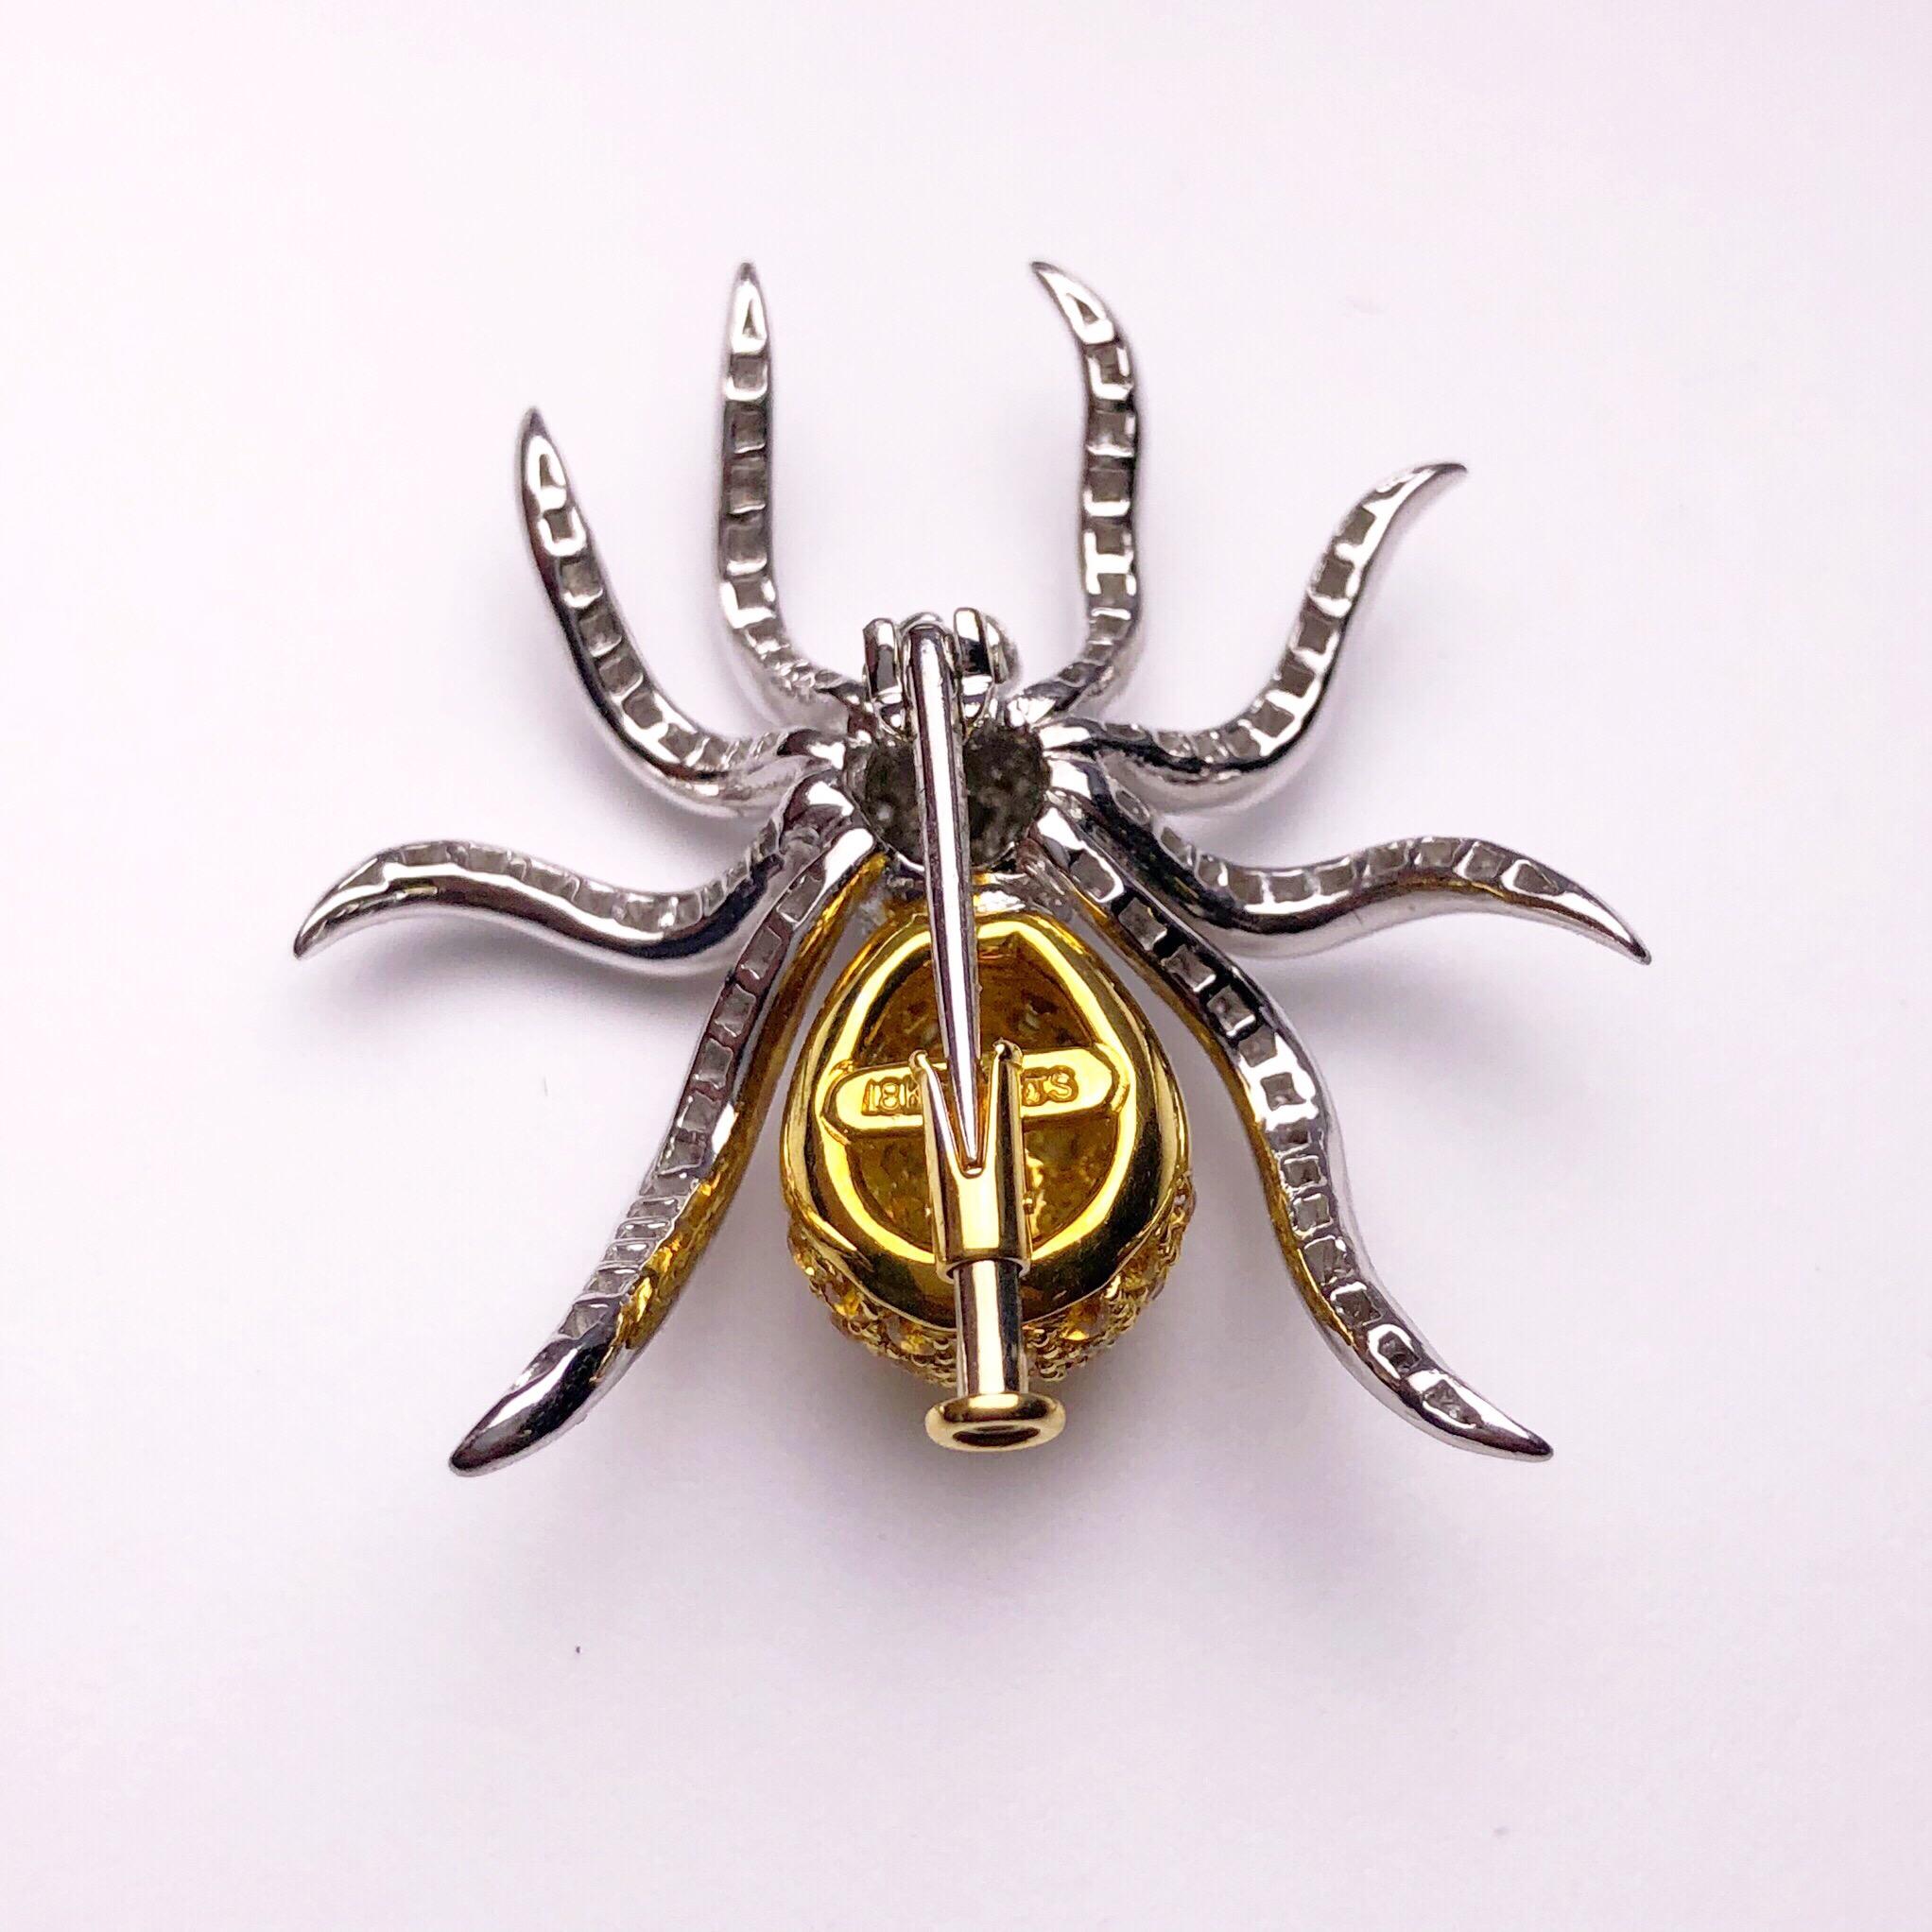 Whimsical and wearable is the best way to describe this lovely spider brooch. Designed with 1.00 carats of brilliant cut diamonds and 1.97 carats of brilliant cut yellow sapphires. The spider measures 1.25